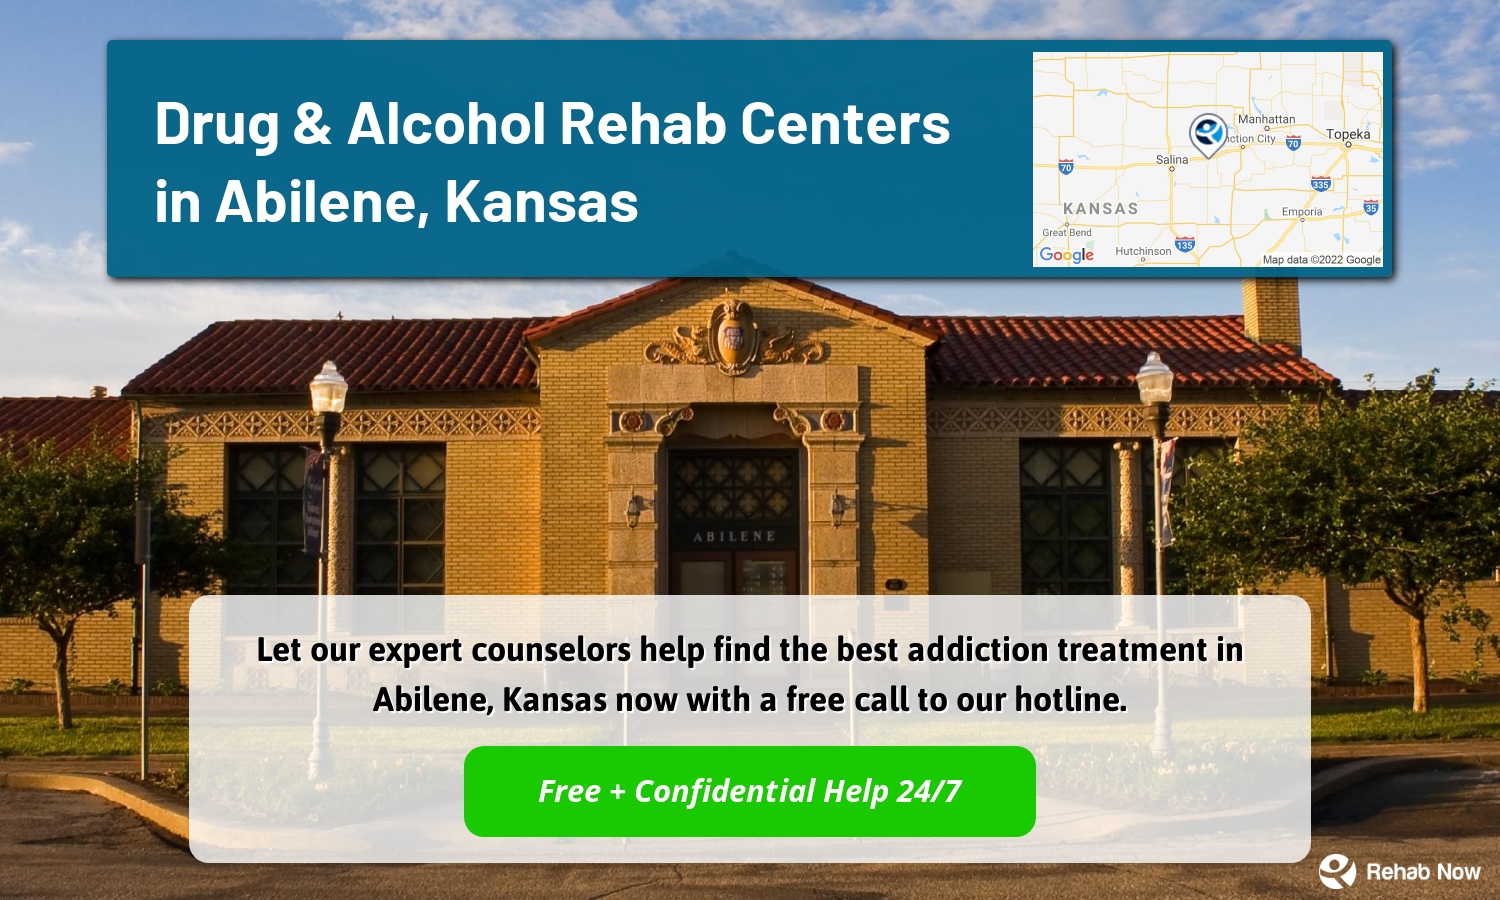 Let our expert counselors help find the best addiction treatment in Abilene, Kansas now with a free call to our hotline.